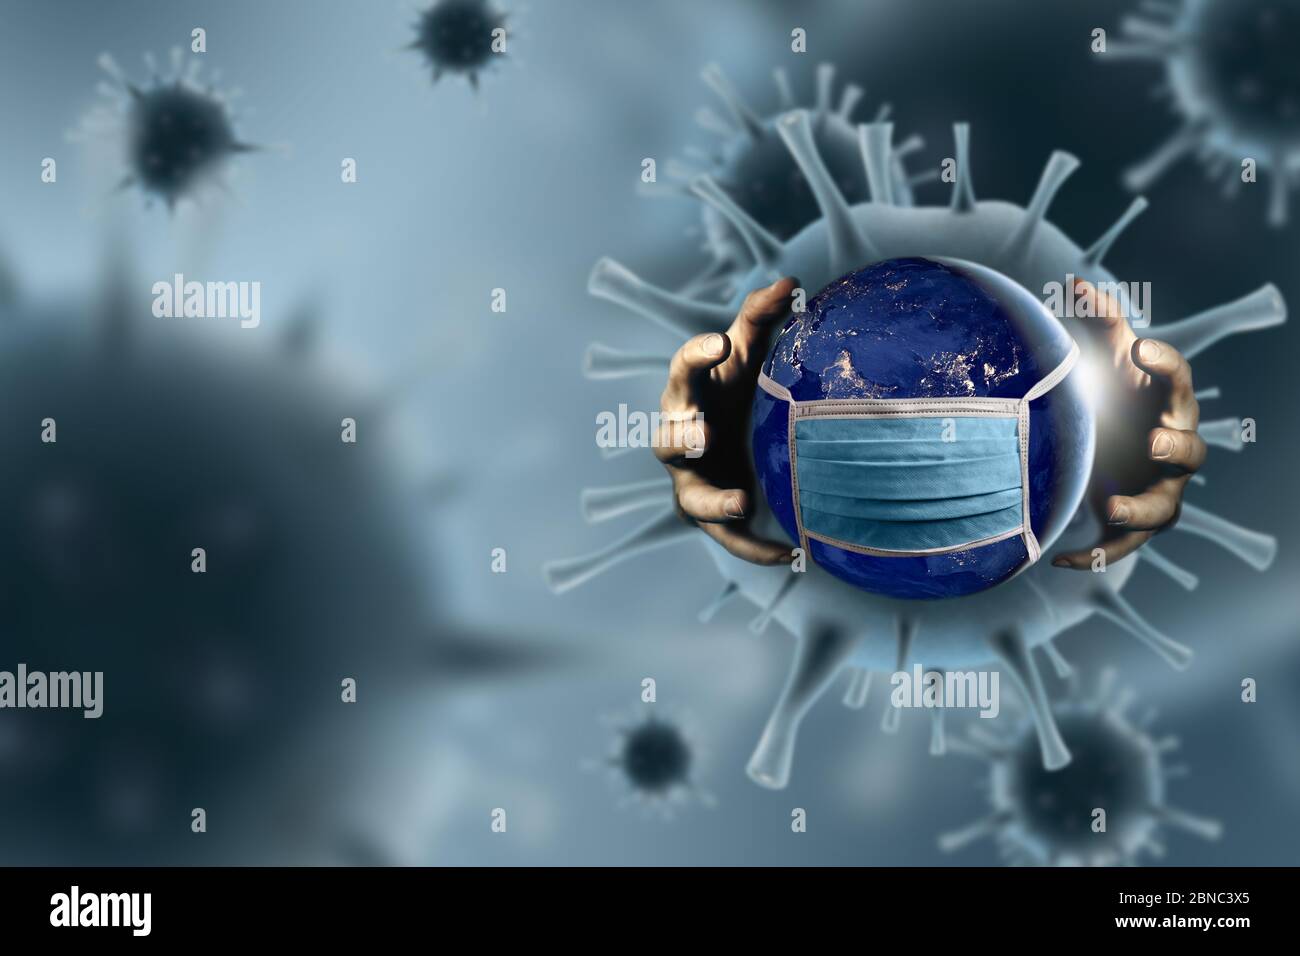 Planet Earth with face mask to protect from coronavirus. Hands grasping the globe with virus cells in background. Covid 19 quarantine, 3D illustration Stock Photo